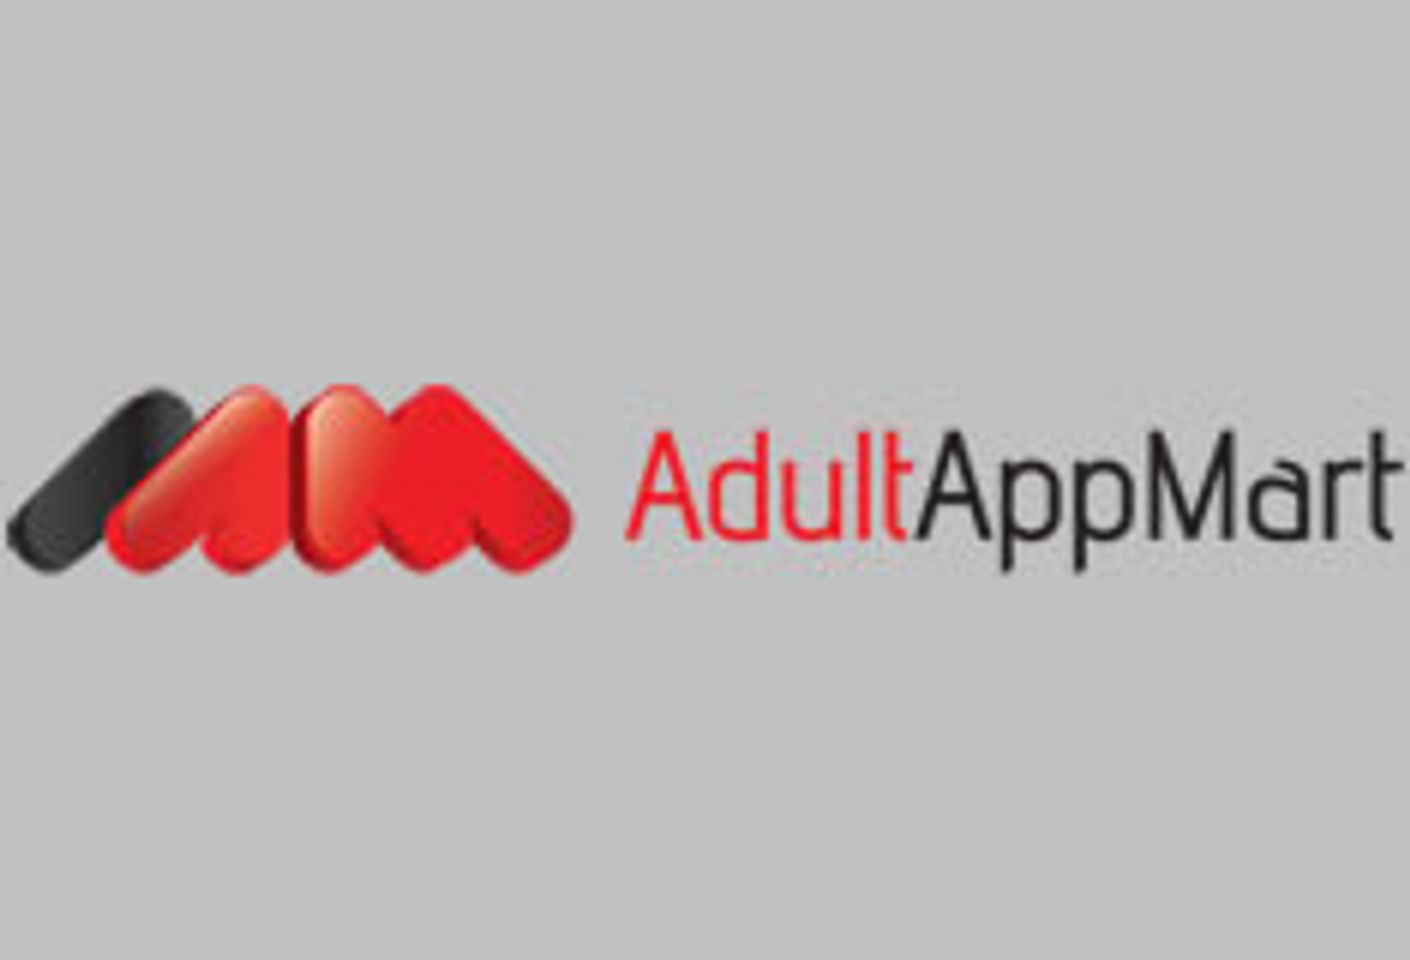 Two New Apps Uploaded to AdultAppMart